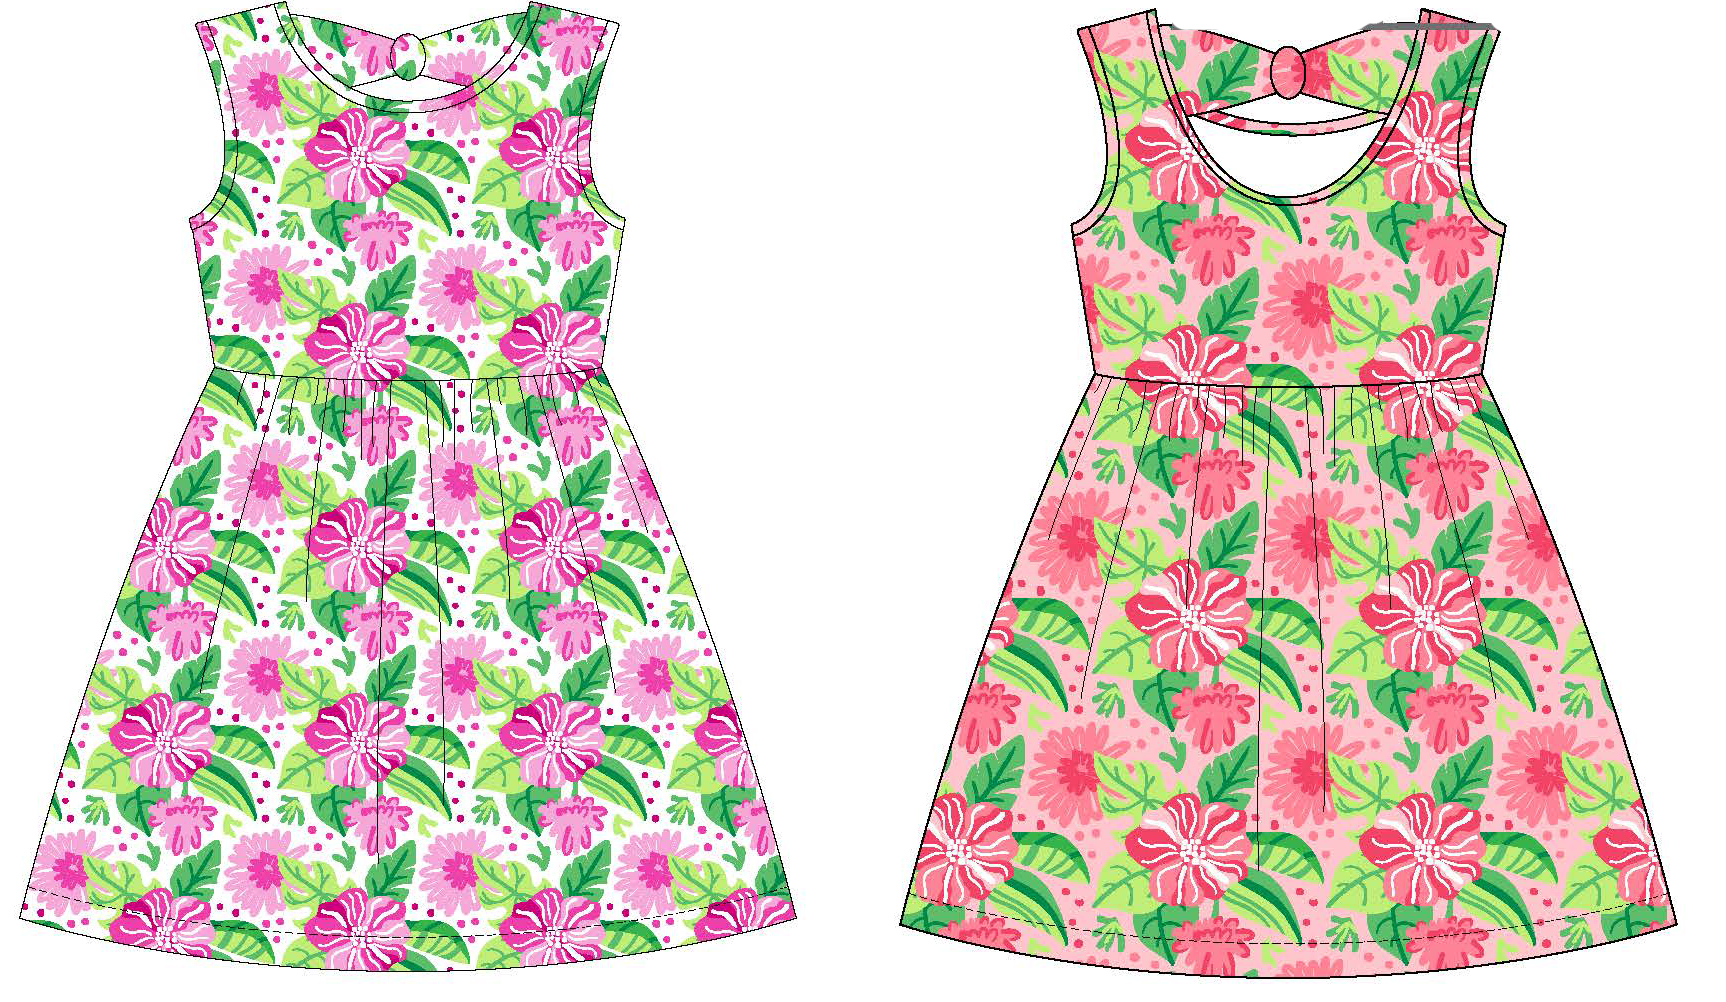 Toddler Girl's Printed Knit Sleeveless Dress w/ UNDERWEAR Panty - Tropical Floral Print - Sizes 2T-4